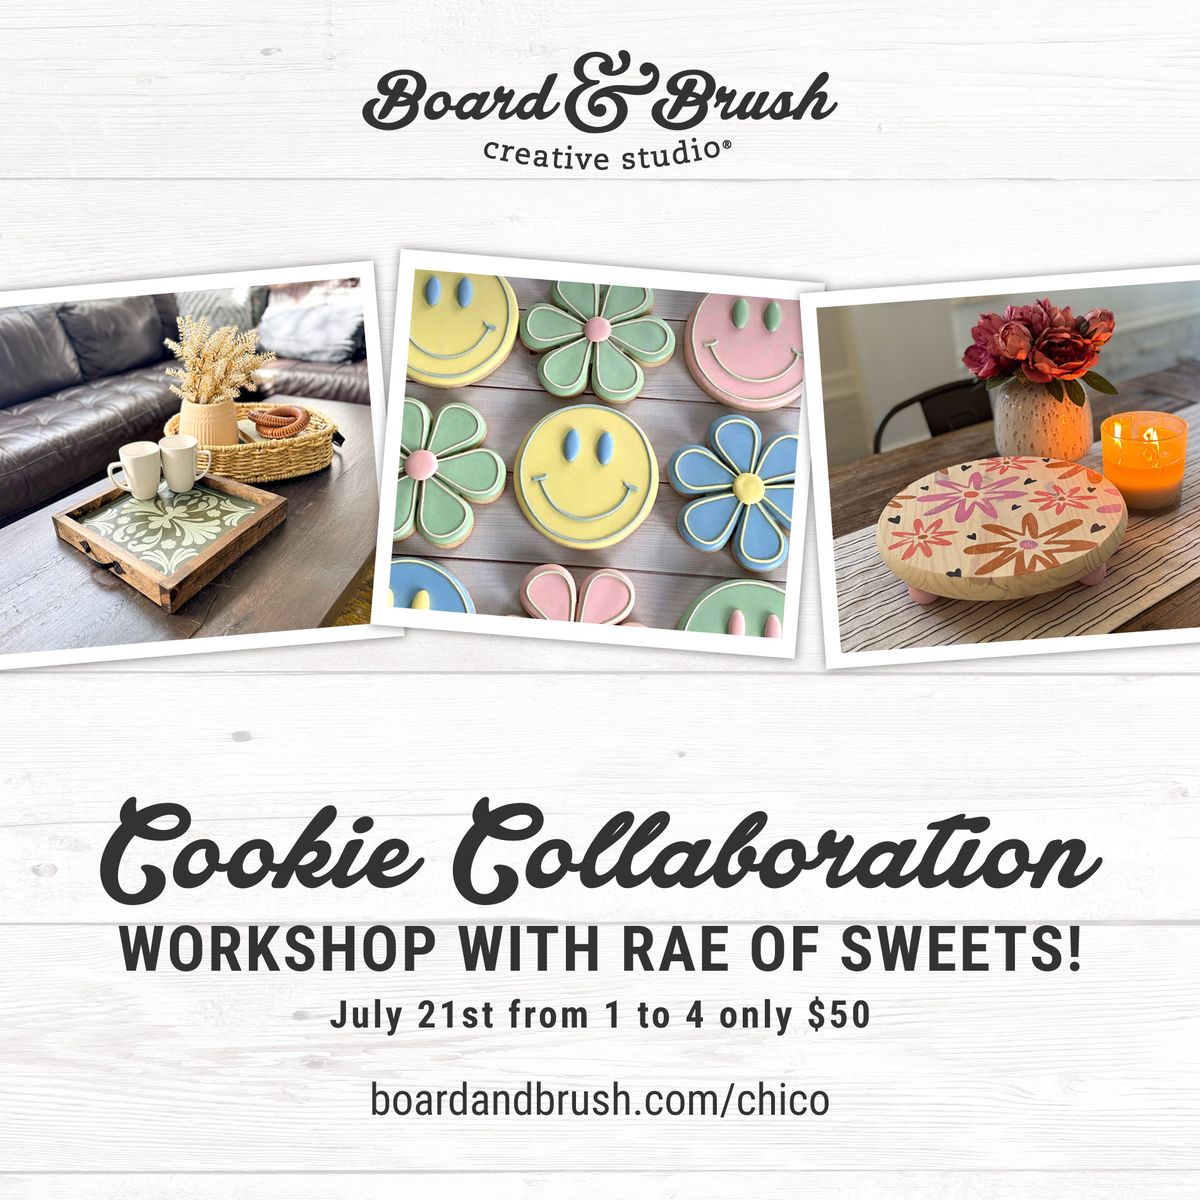 COOKIE DECORATING AND DIY WOOD TRAY WORKSHOP WITH RAE OF SWEETS